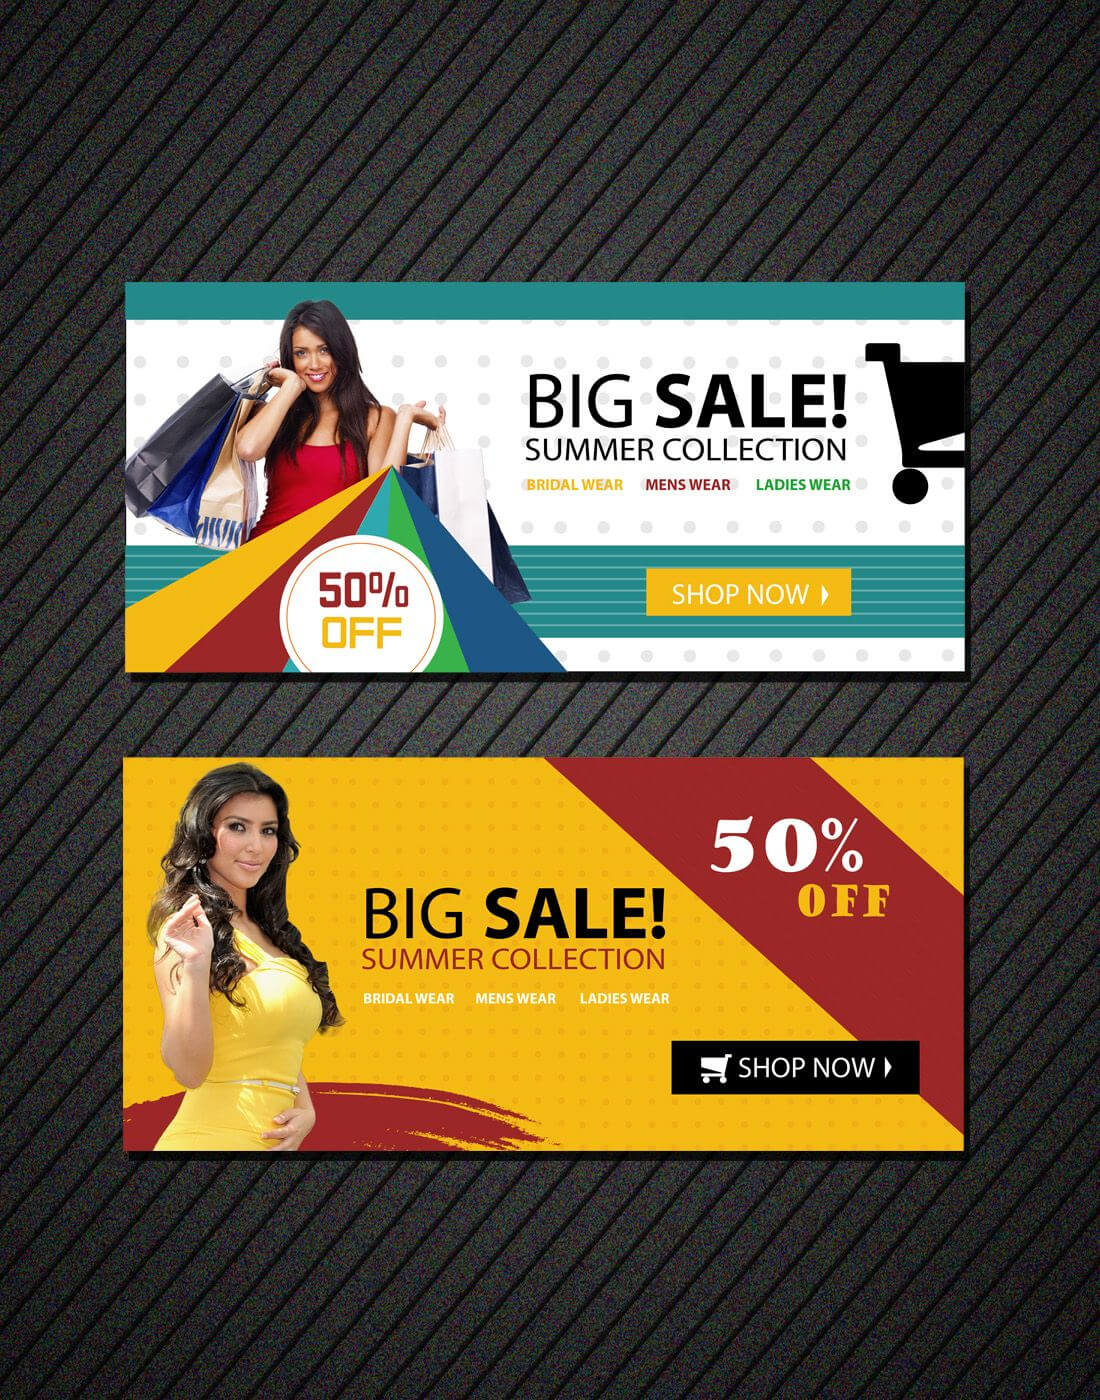 Online Shopping Banners Templates | Free Website Psd Banners With Regard To Free Online Banner Templates